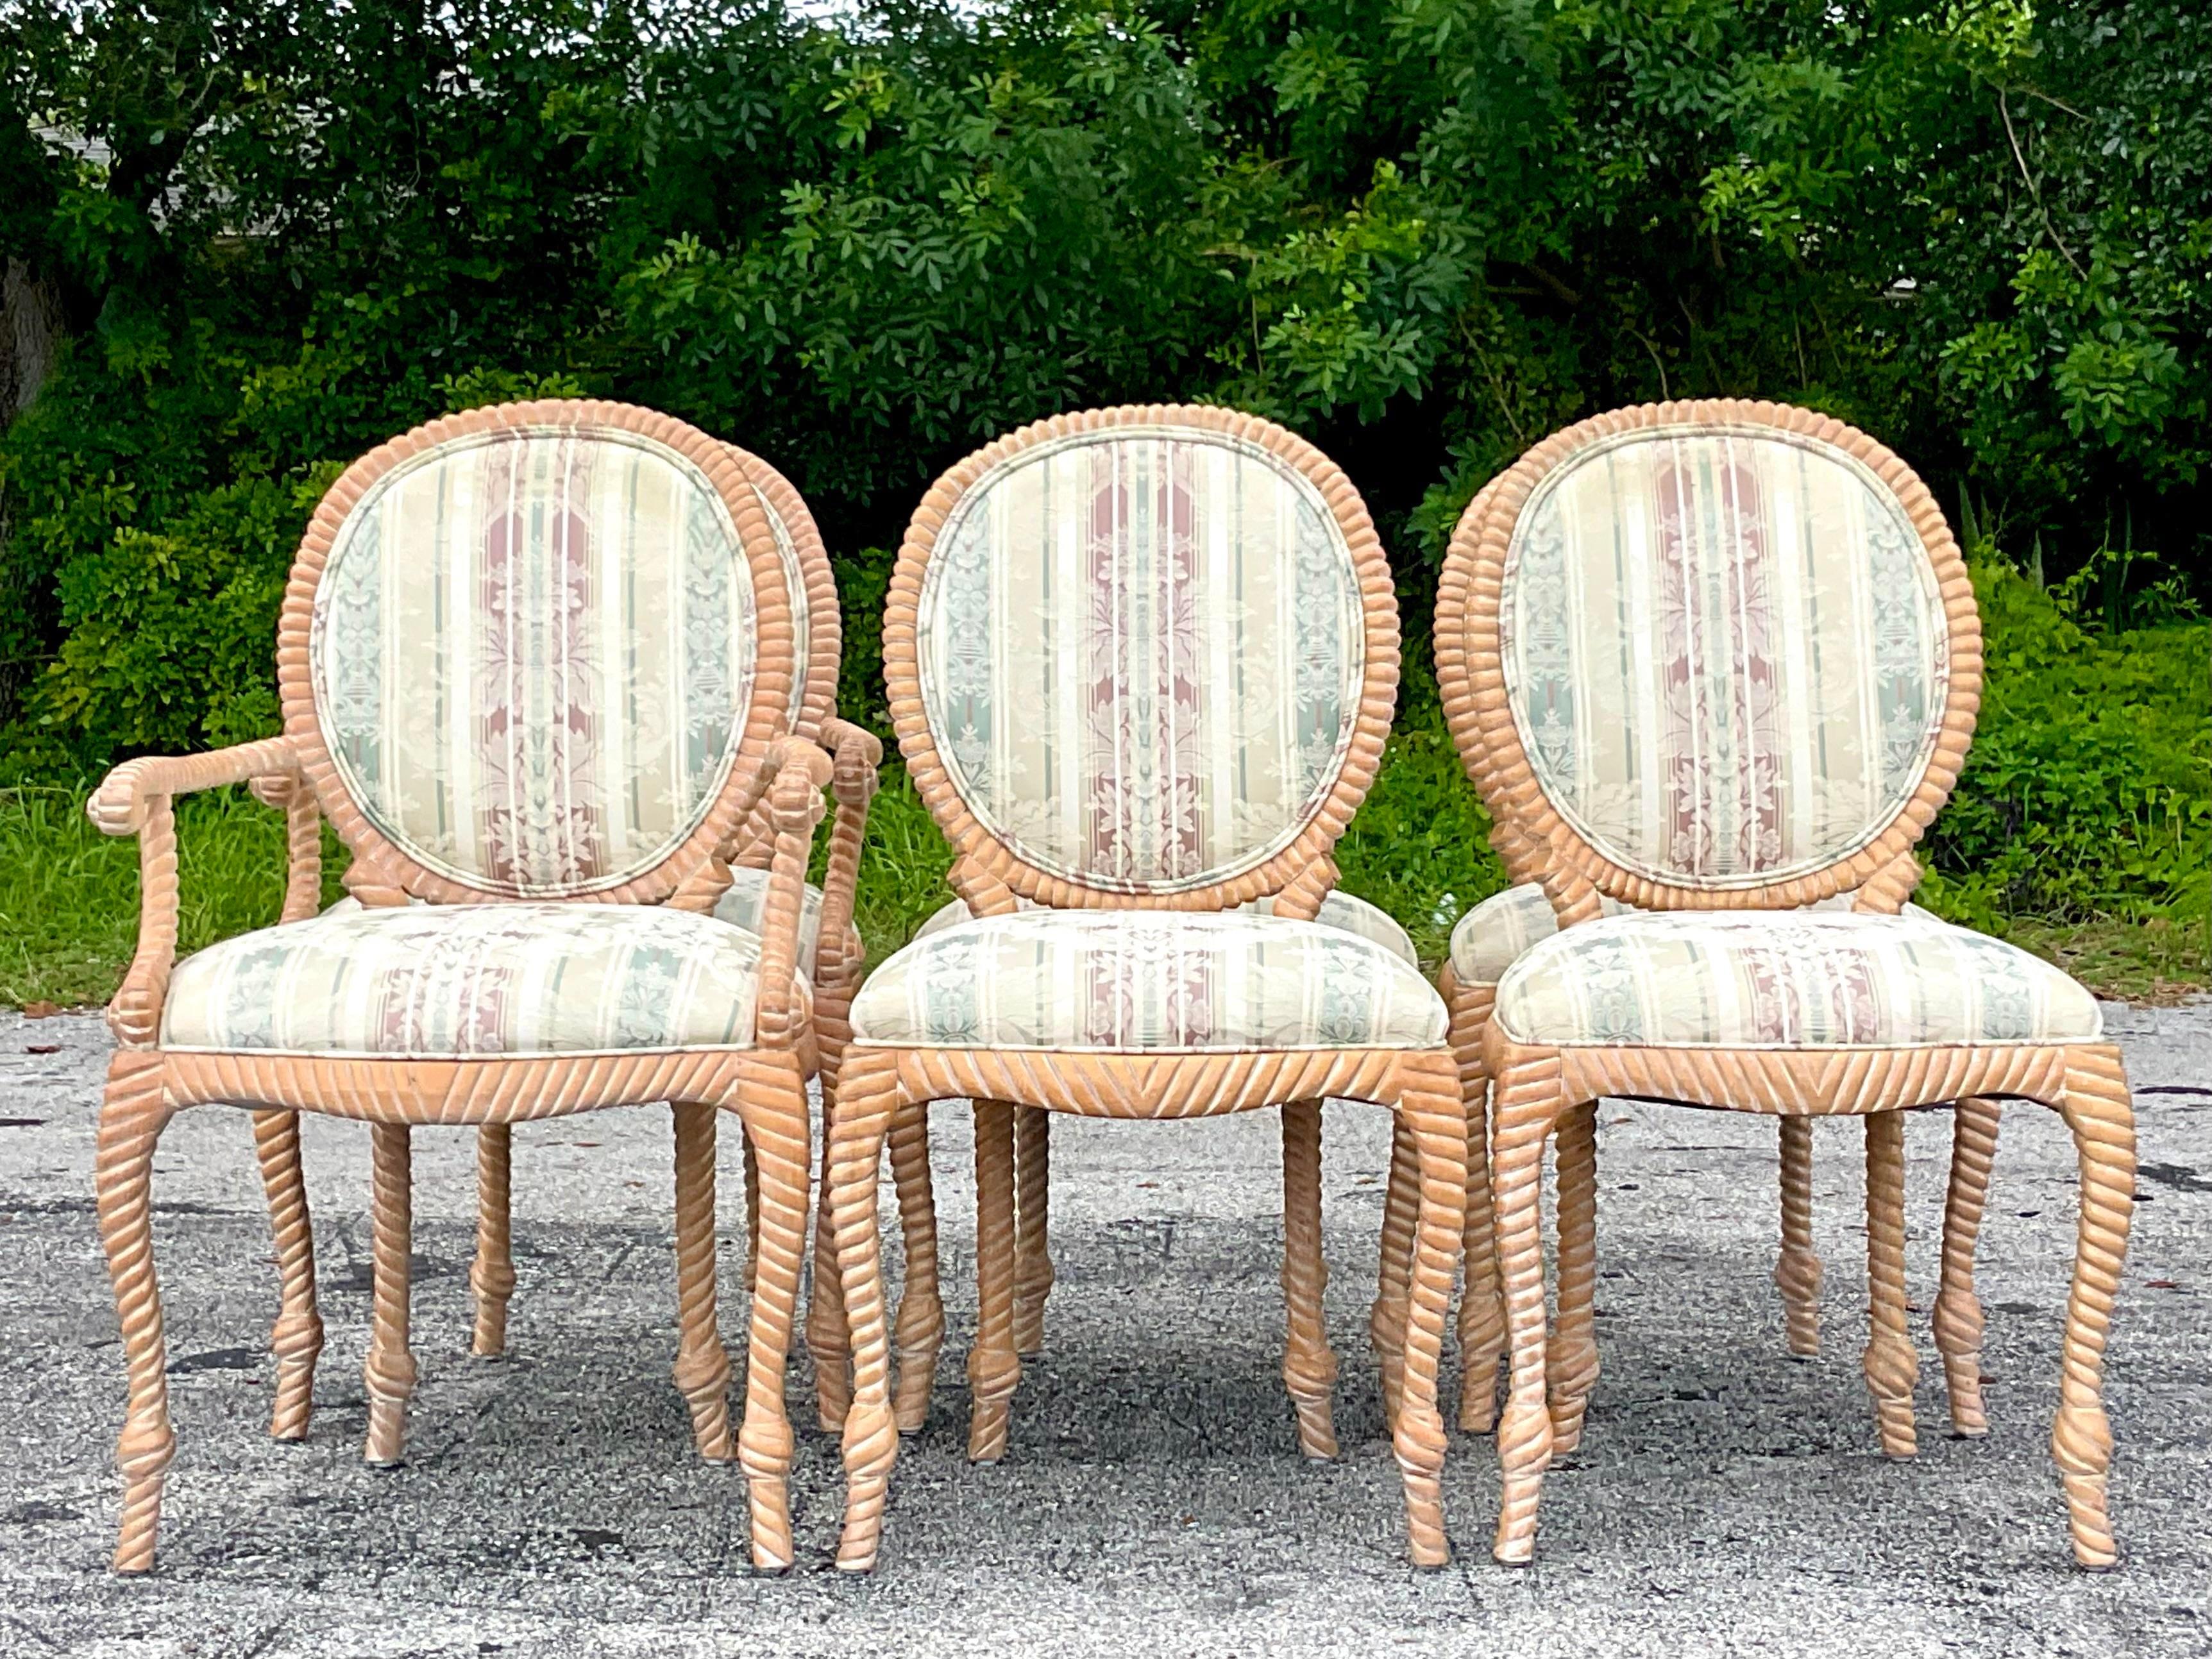 A fabulous set of 6 vintage Boho dining chairs. Beautiful carved wood design in a pale wood. Two arm chairs and four sides. Acquired from a Palm Beach estate.